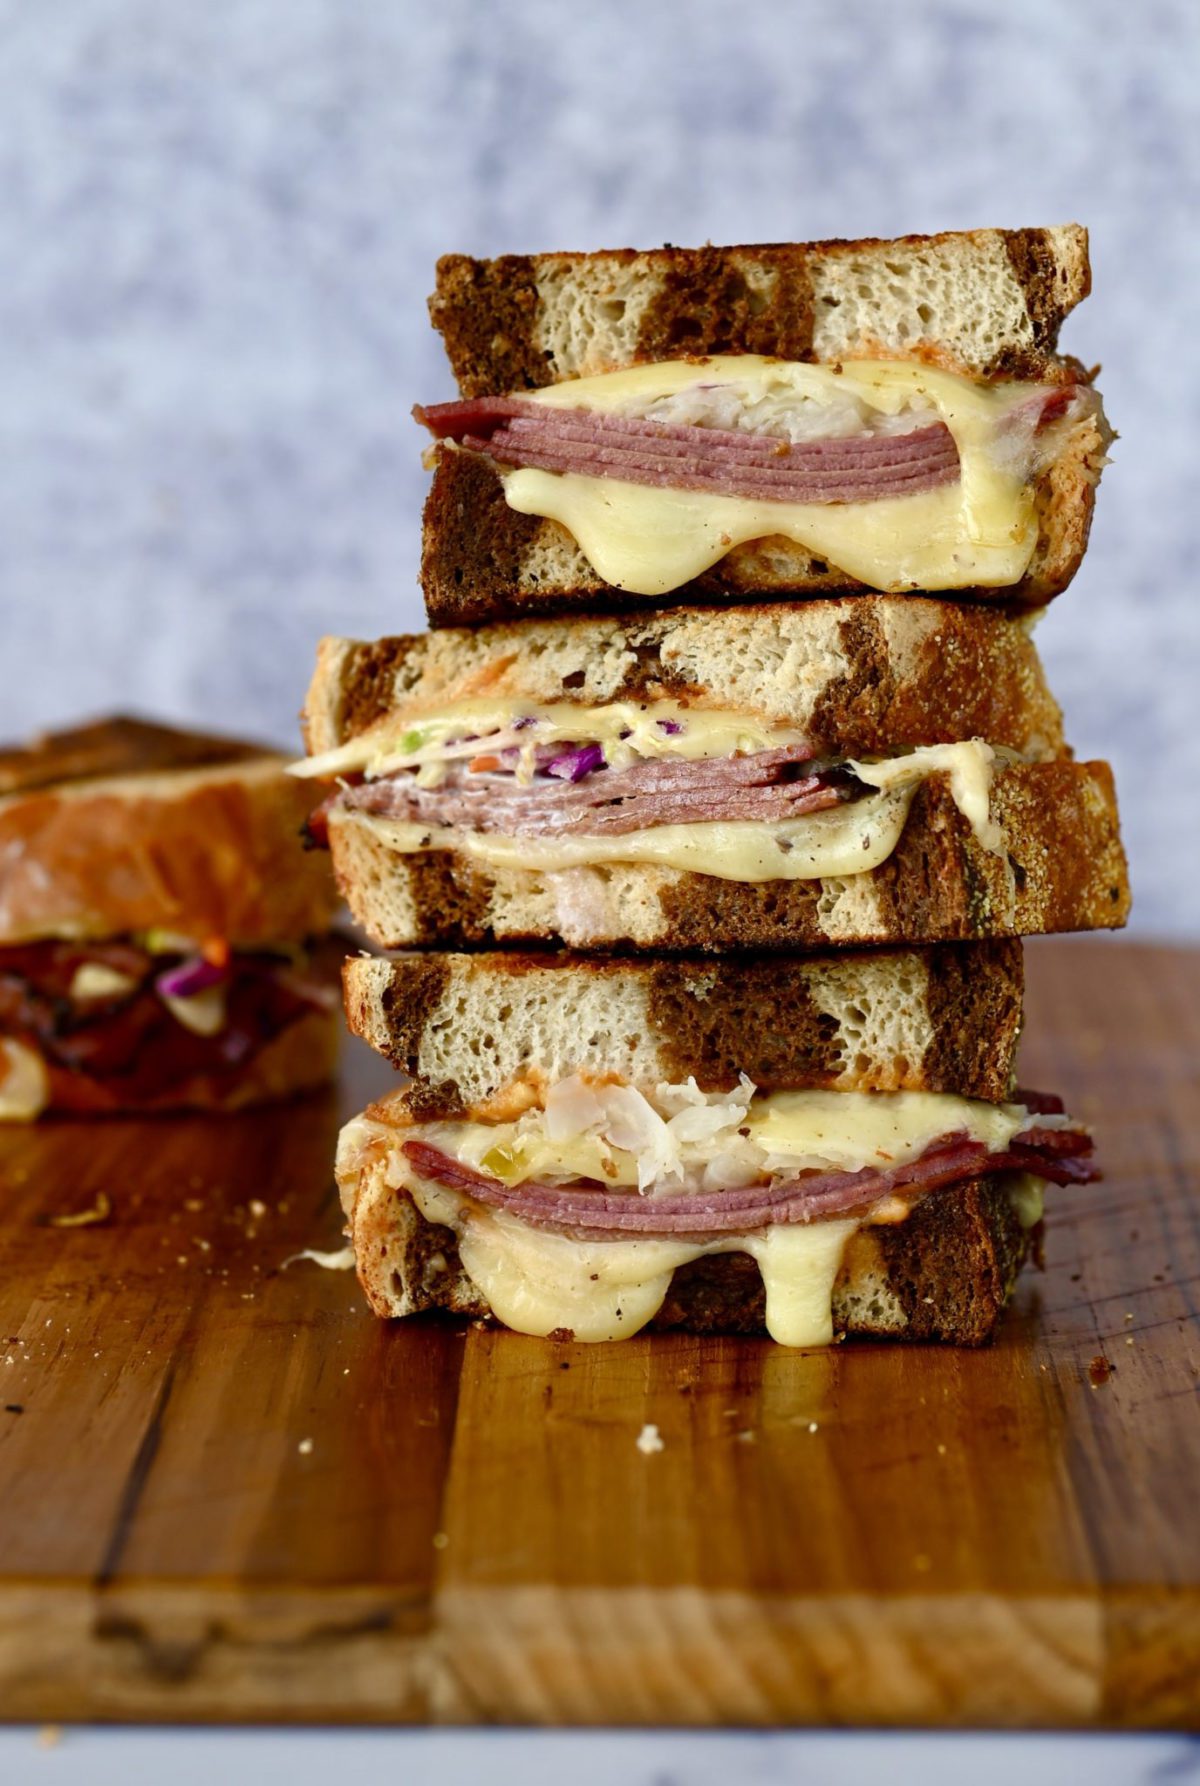 The Reuben Sandwich (and the Rachel) - Once Upon a Chef